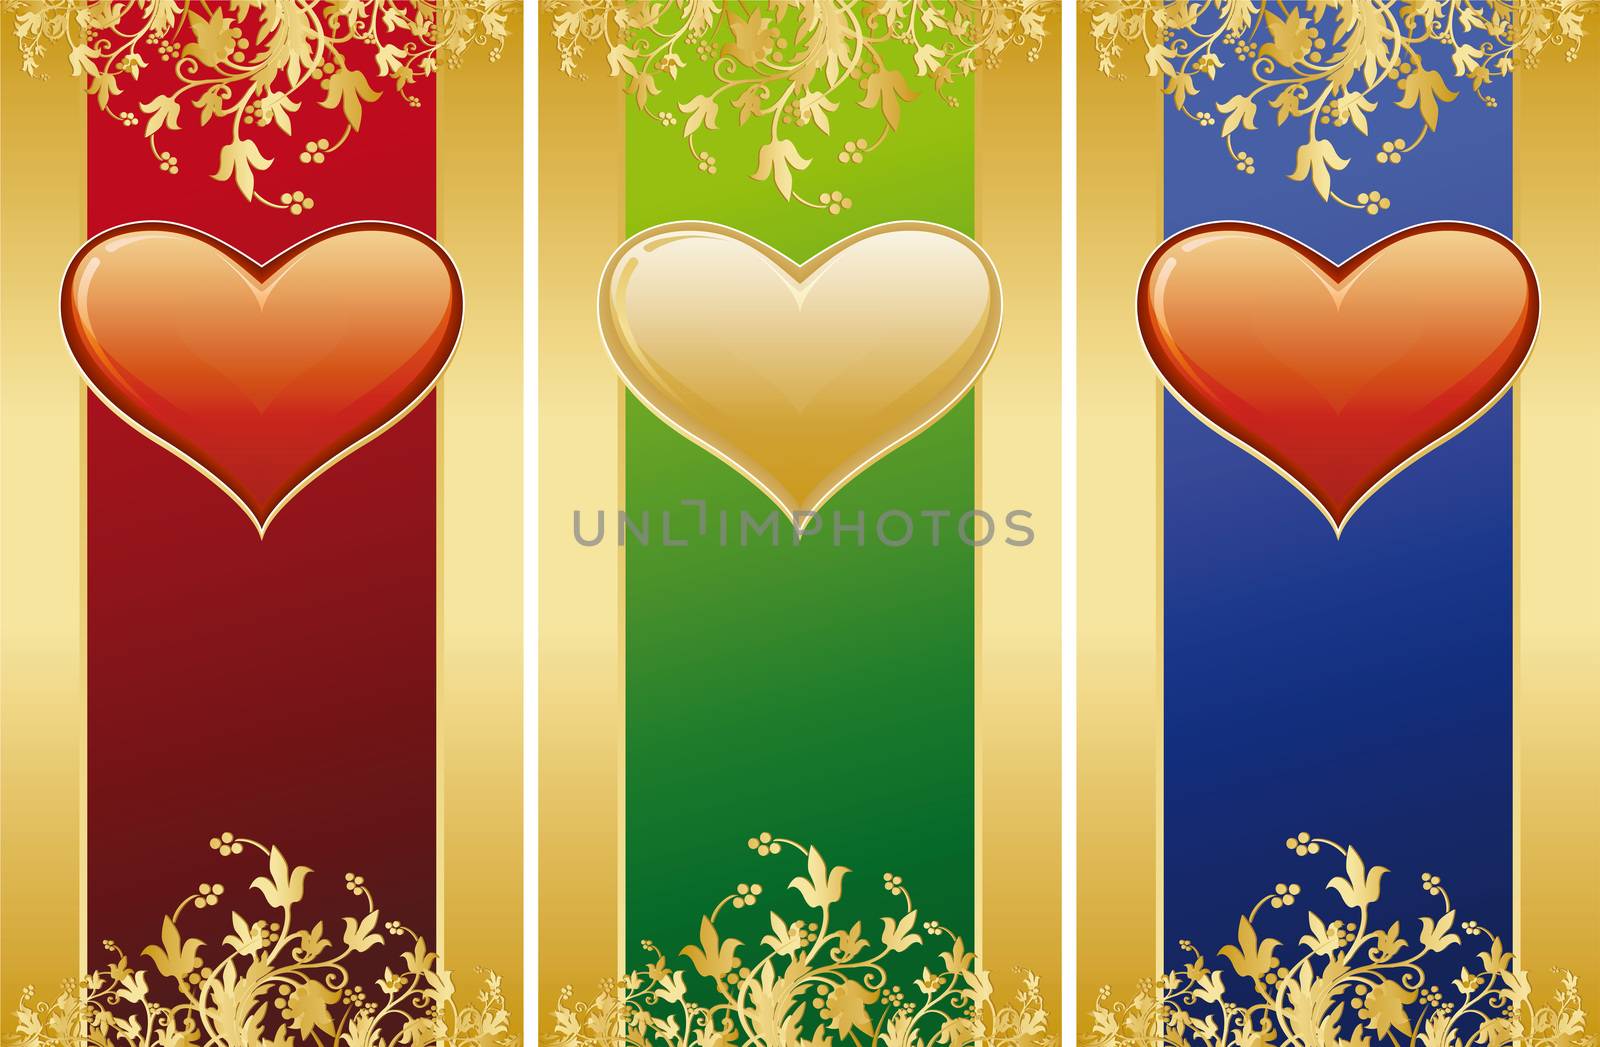 Valentine card with gold decoration and heart shape